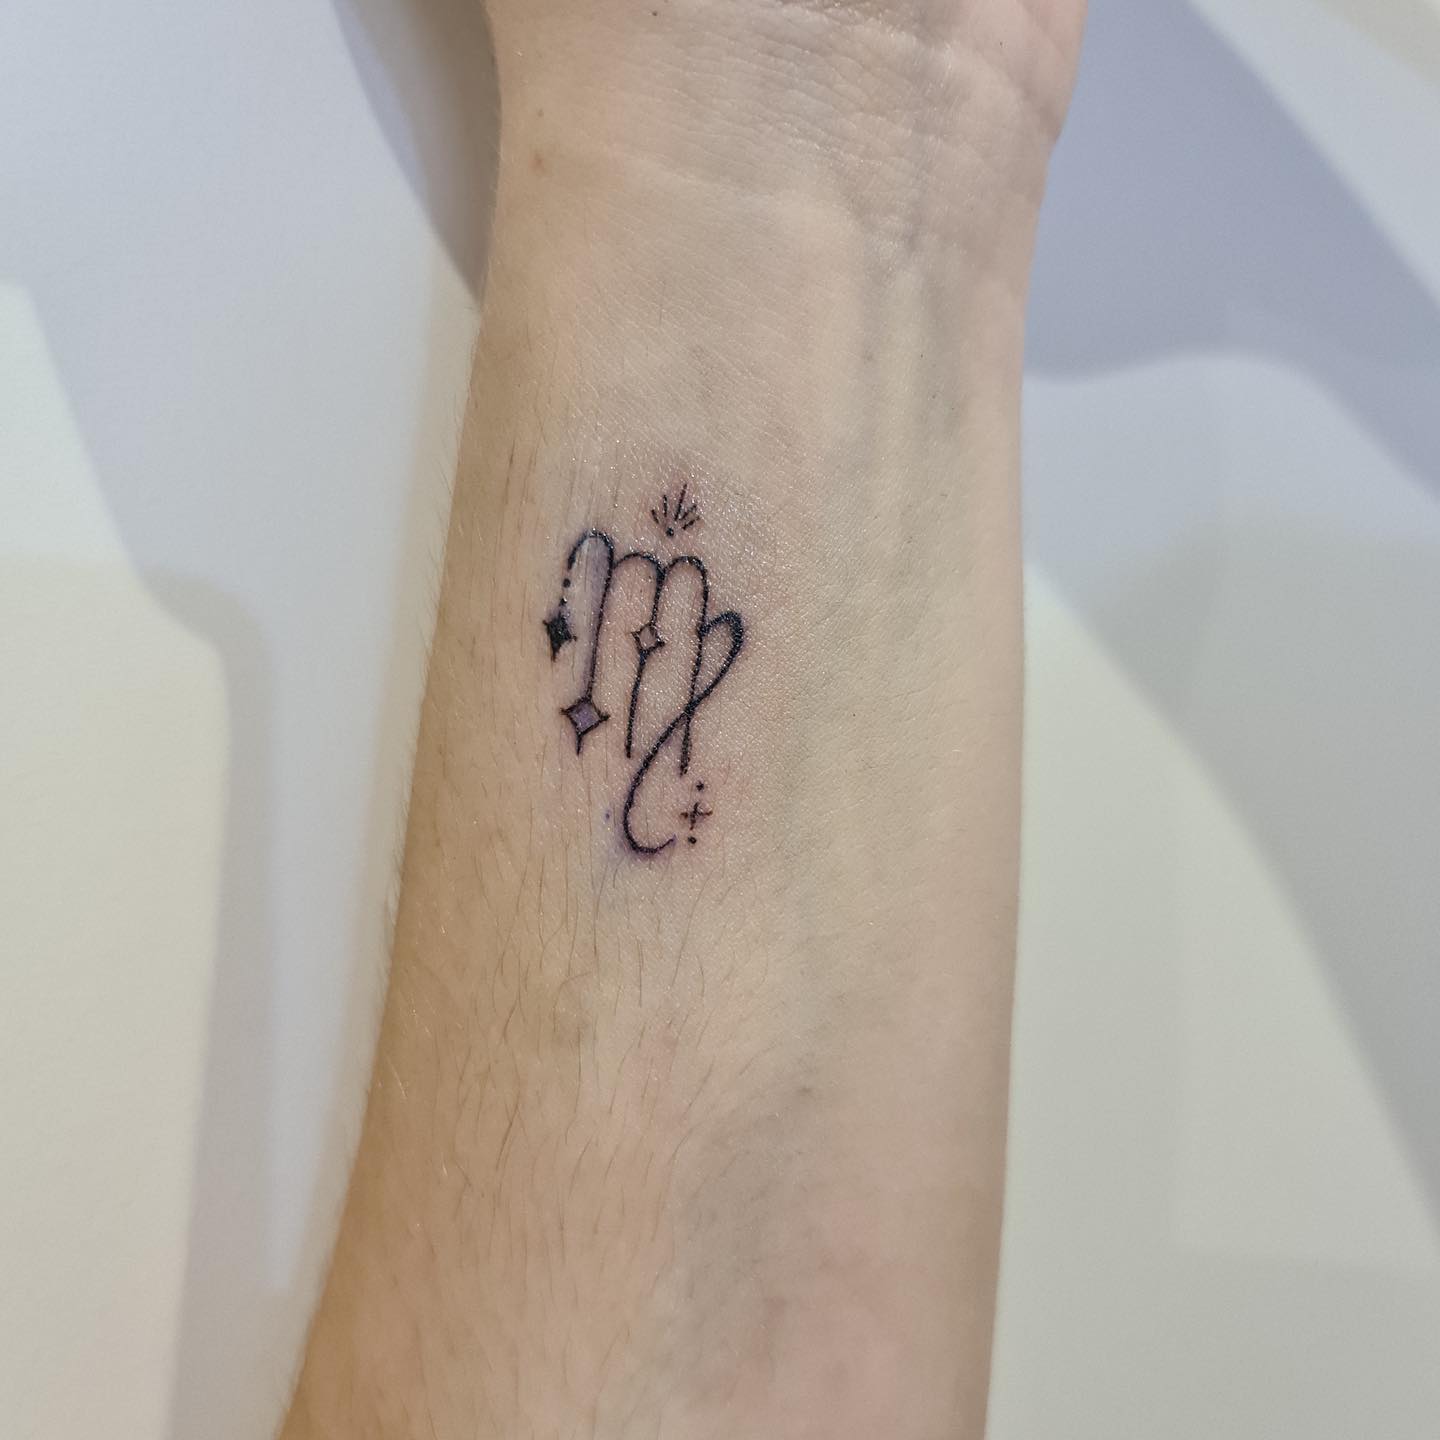 A small and ornamented Virgo tattoo sound nice, doesn't it? Minimalist tattoo lovers must go for it.